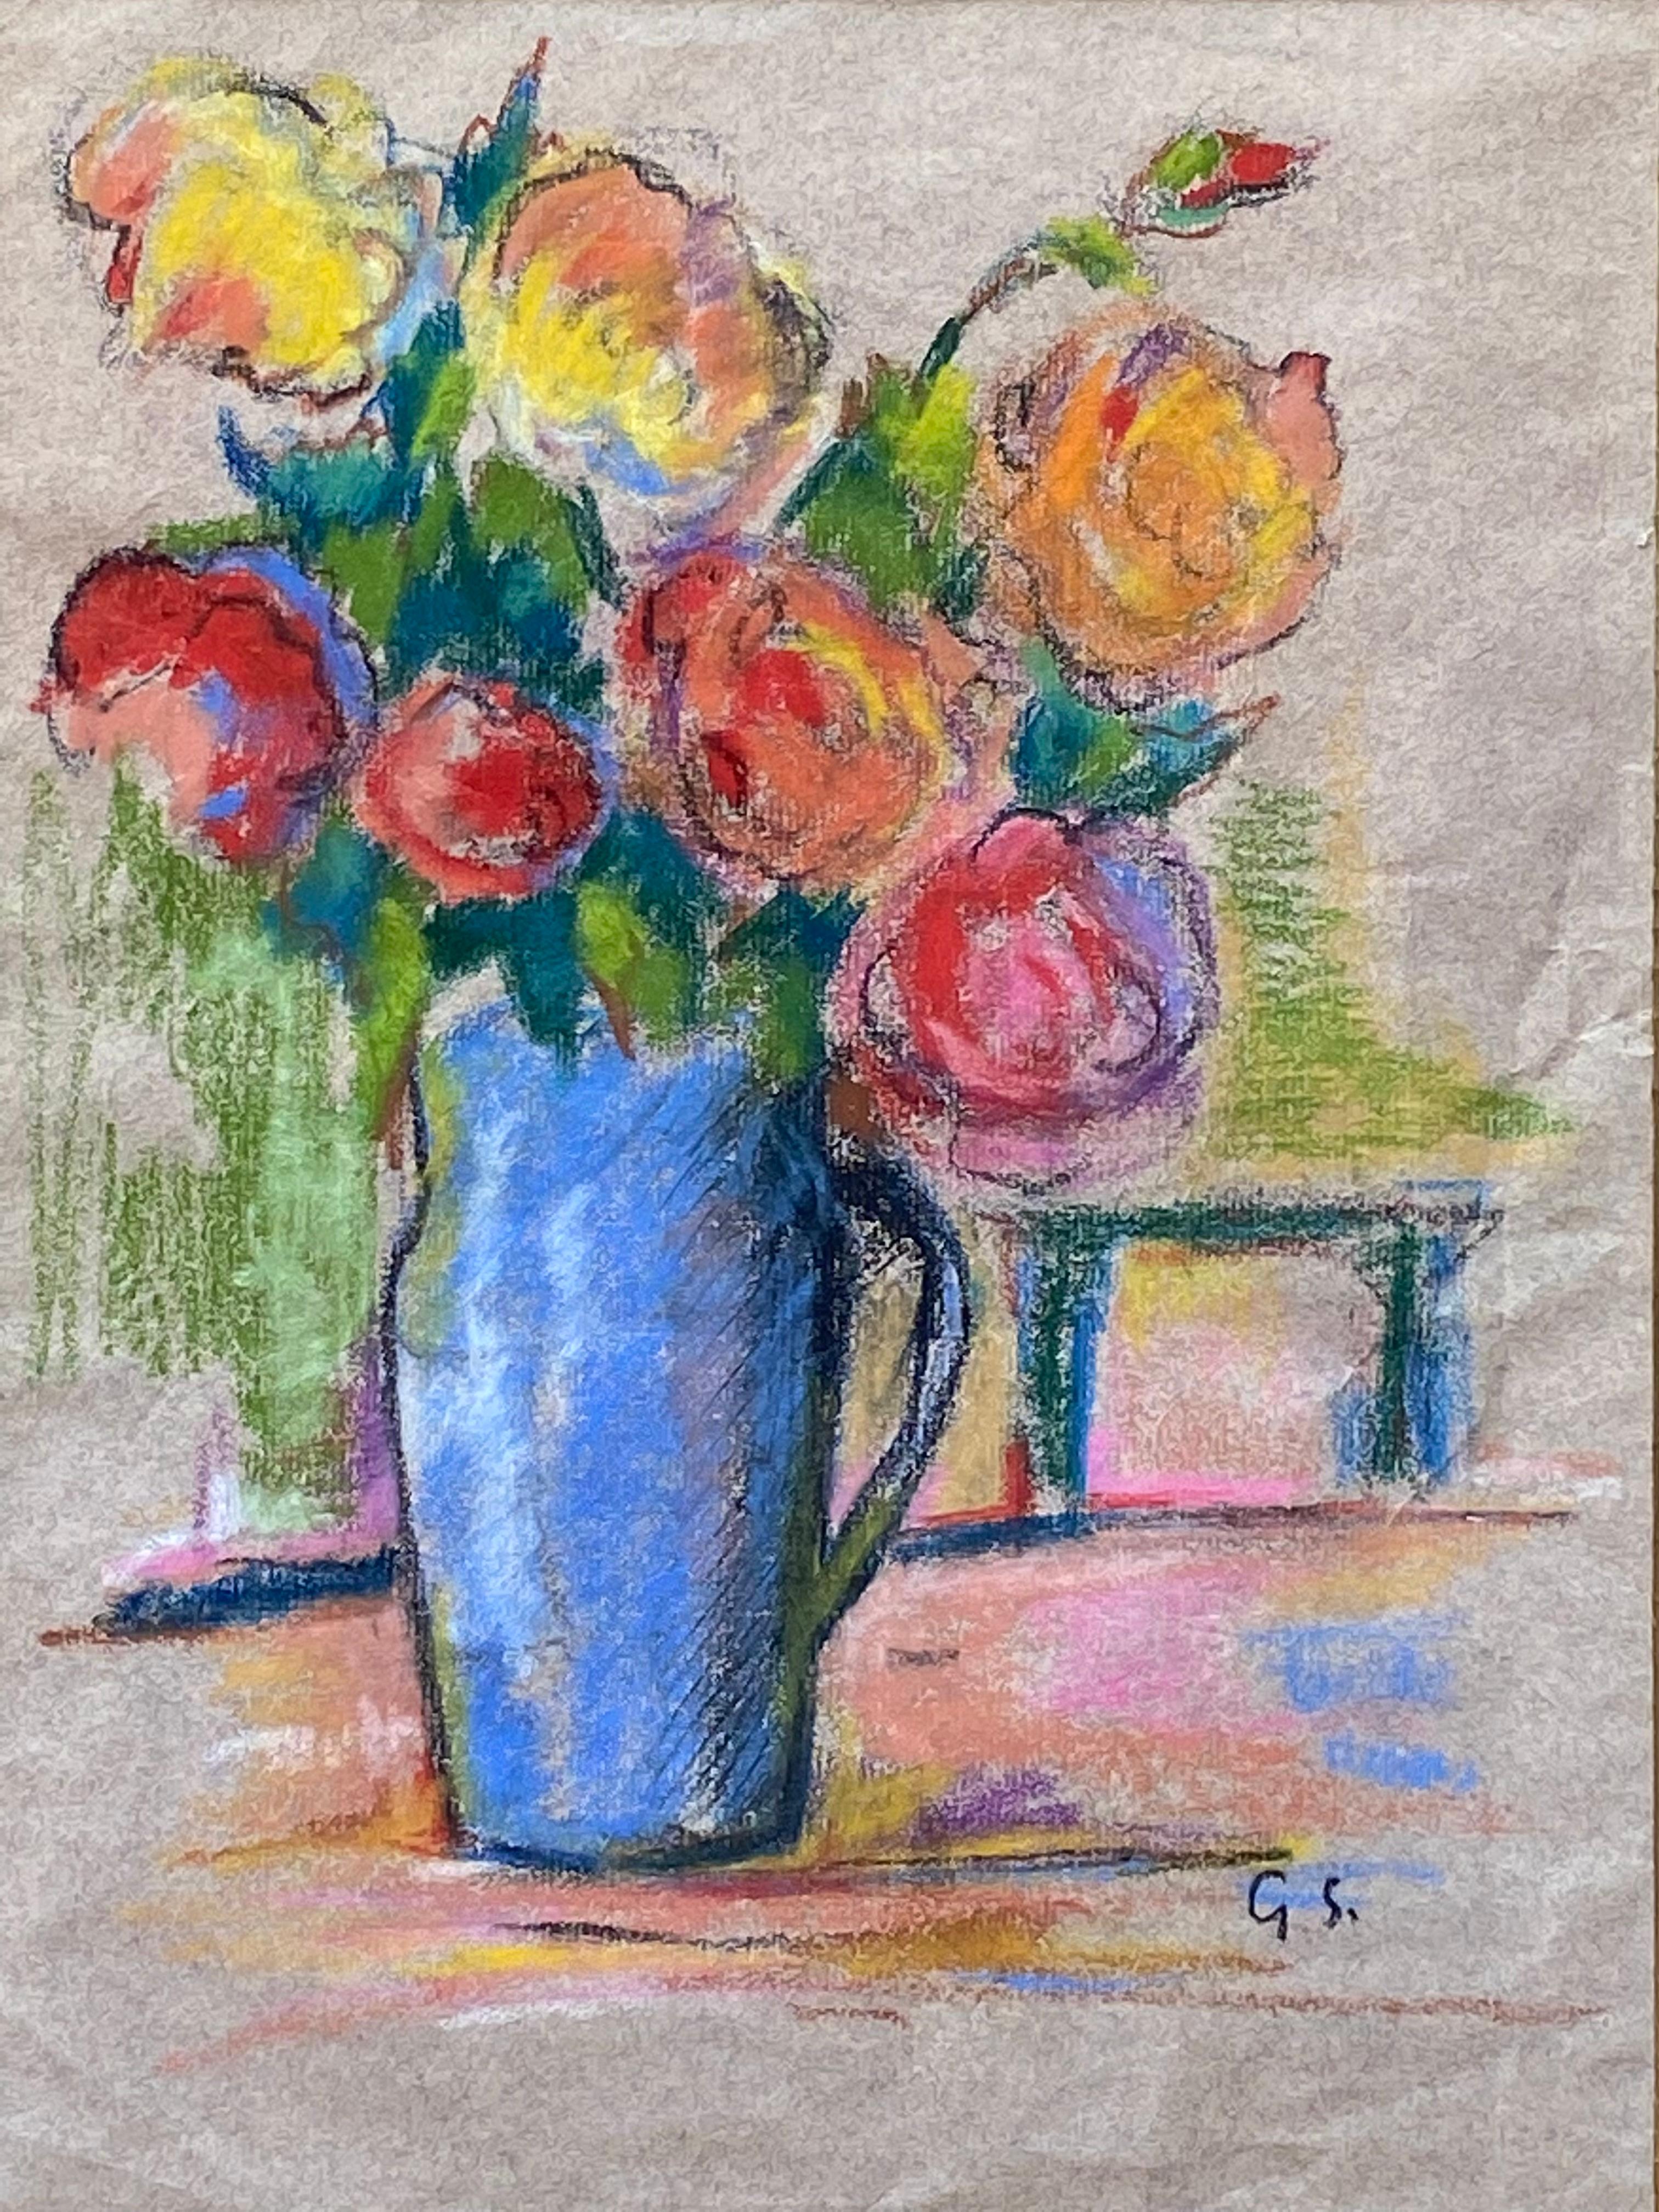 Very fine and vibrant oil pastel on archival paper of a spring bouquet by the well known French artist, Gaston Sebire.  Signed with the artist’s initials lower right. Circa 1960. Condition is very good.  Professionally matted and housed in its